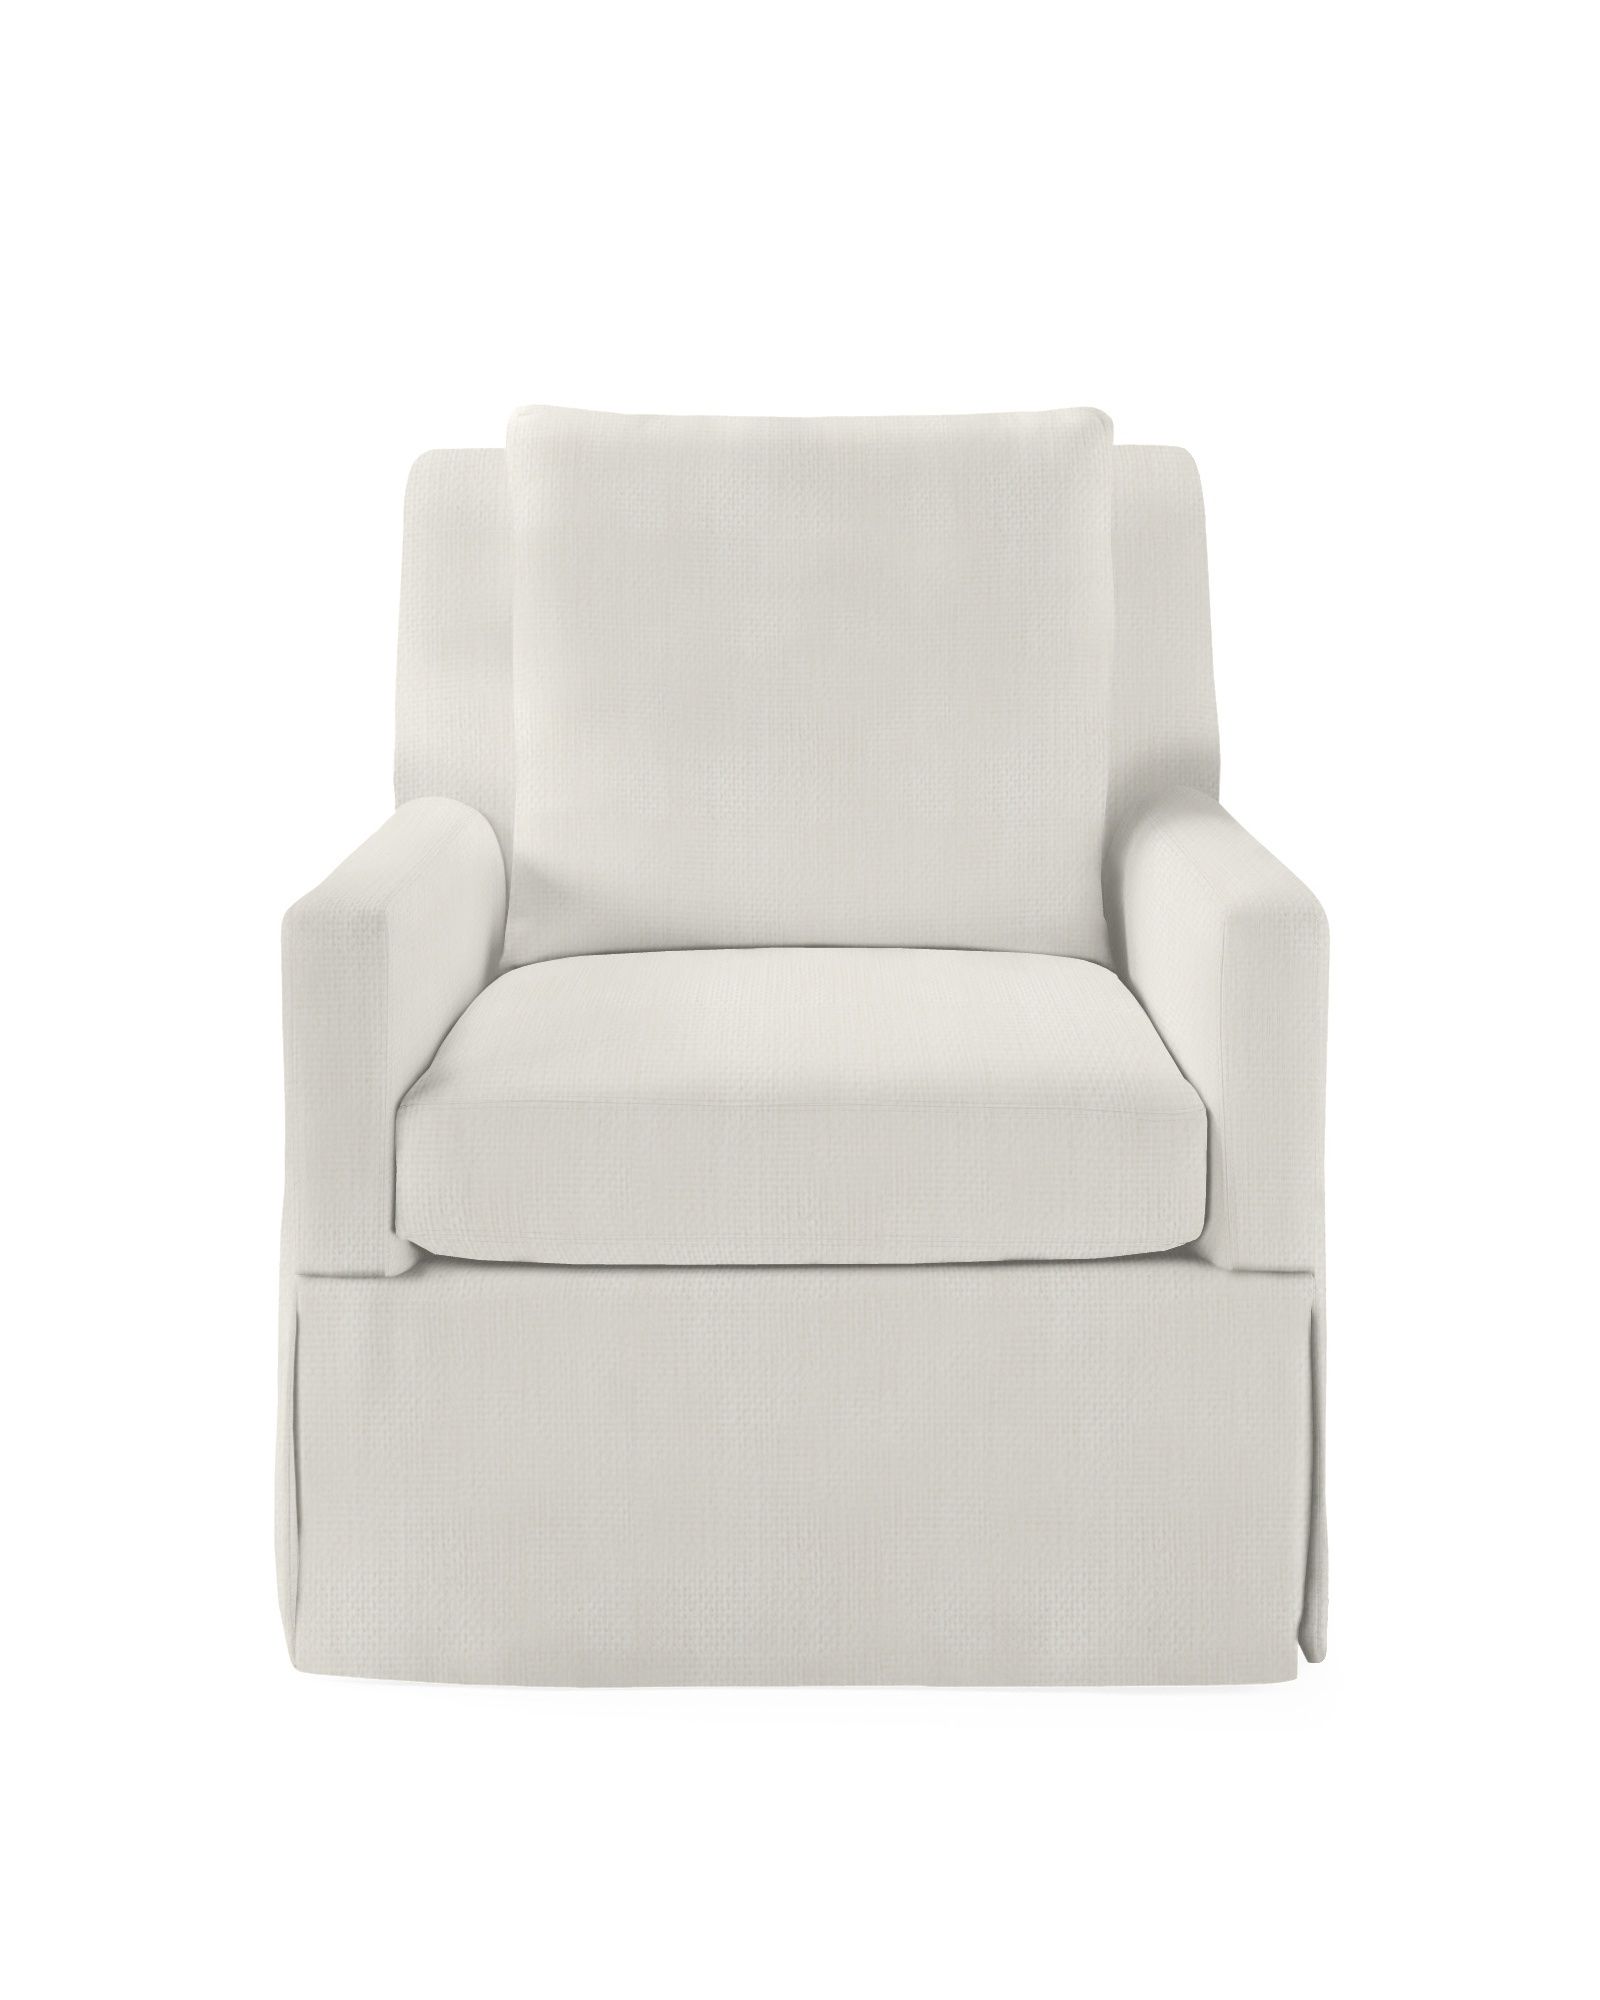 Jamieson Swivel Chair - Slipcovered | Serena and Lily